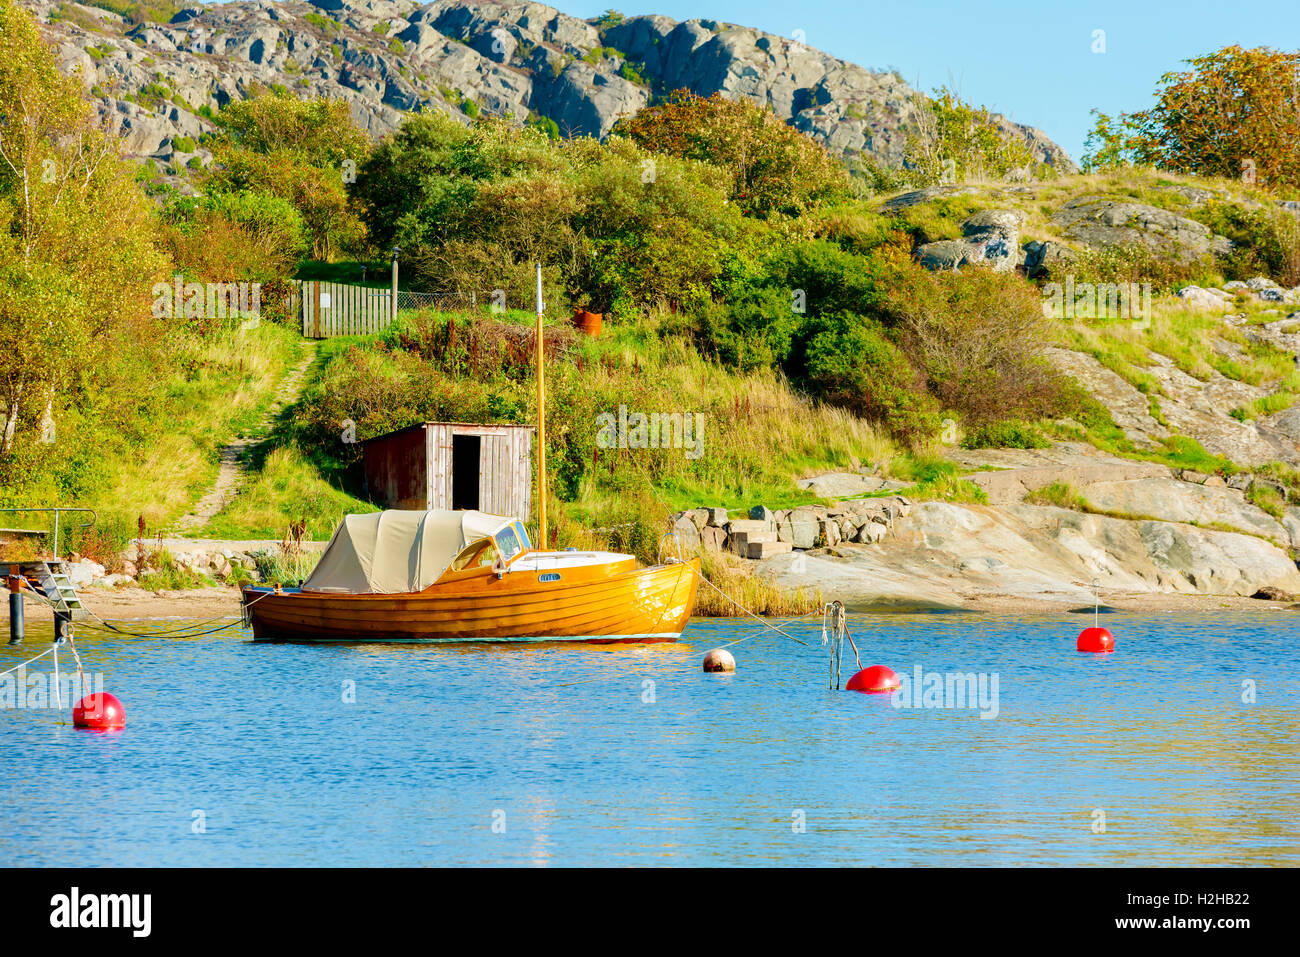 Old wooden motorboat with sailing mast moored in seaside bay close to cliffs and shrubbery. Stock Photo